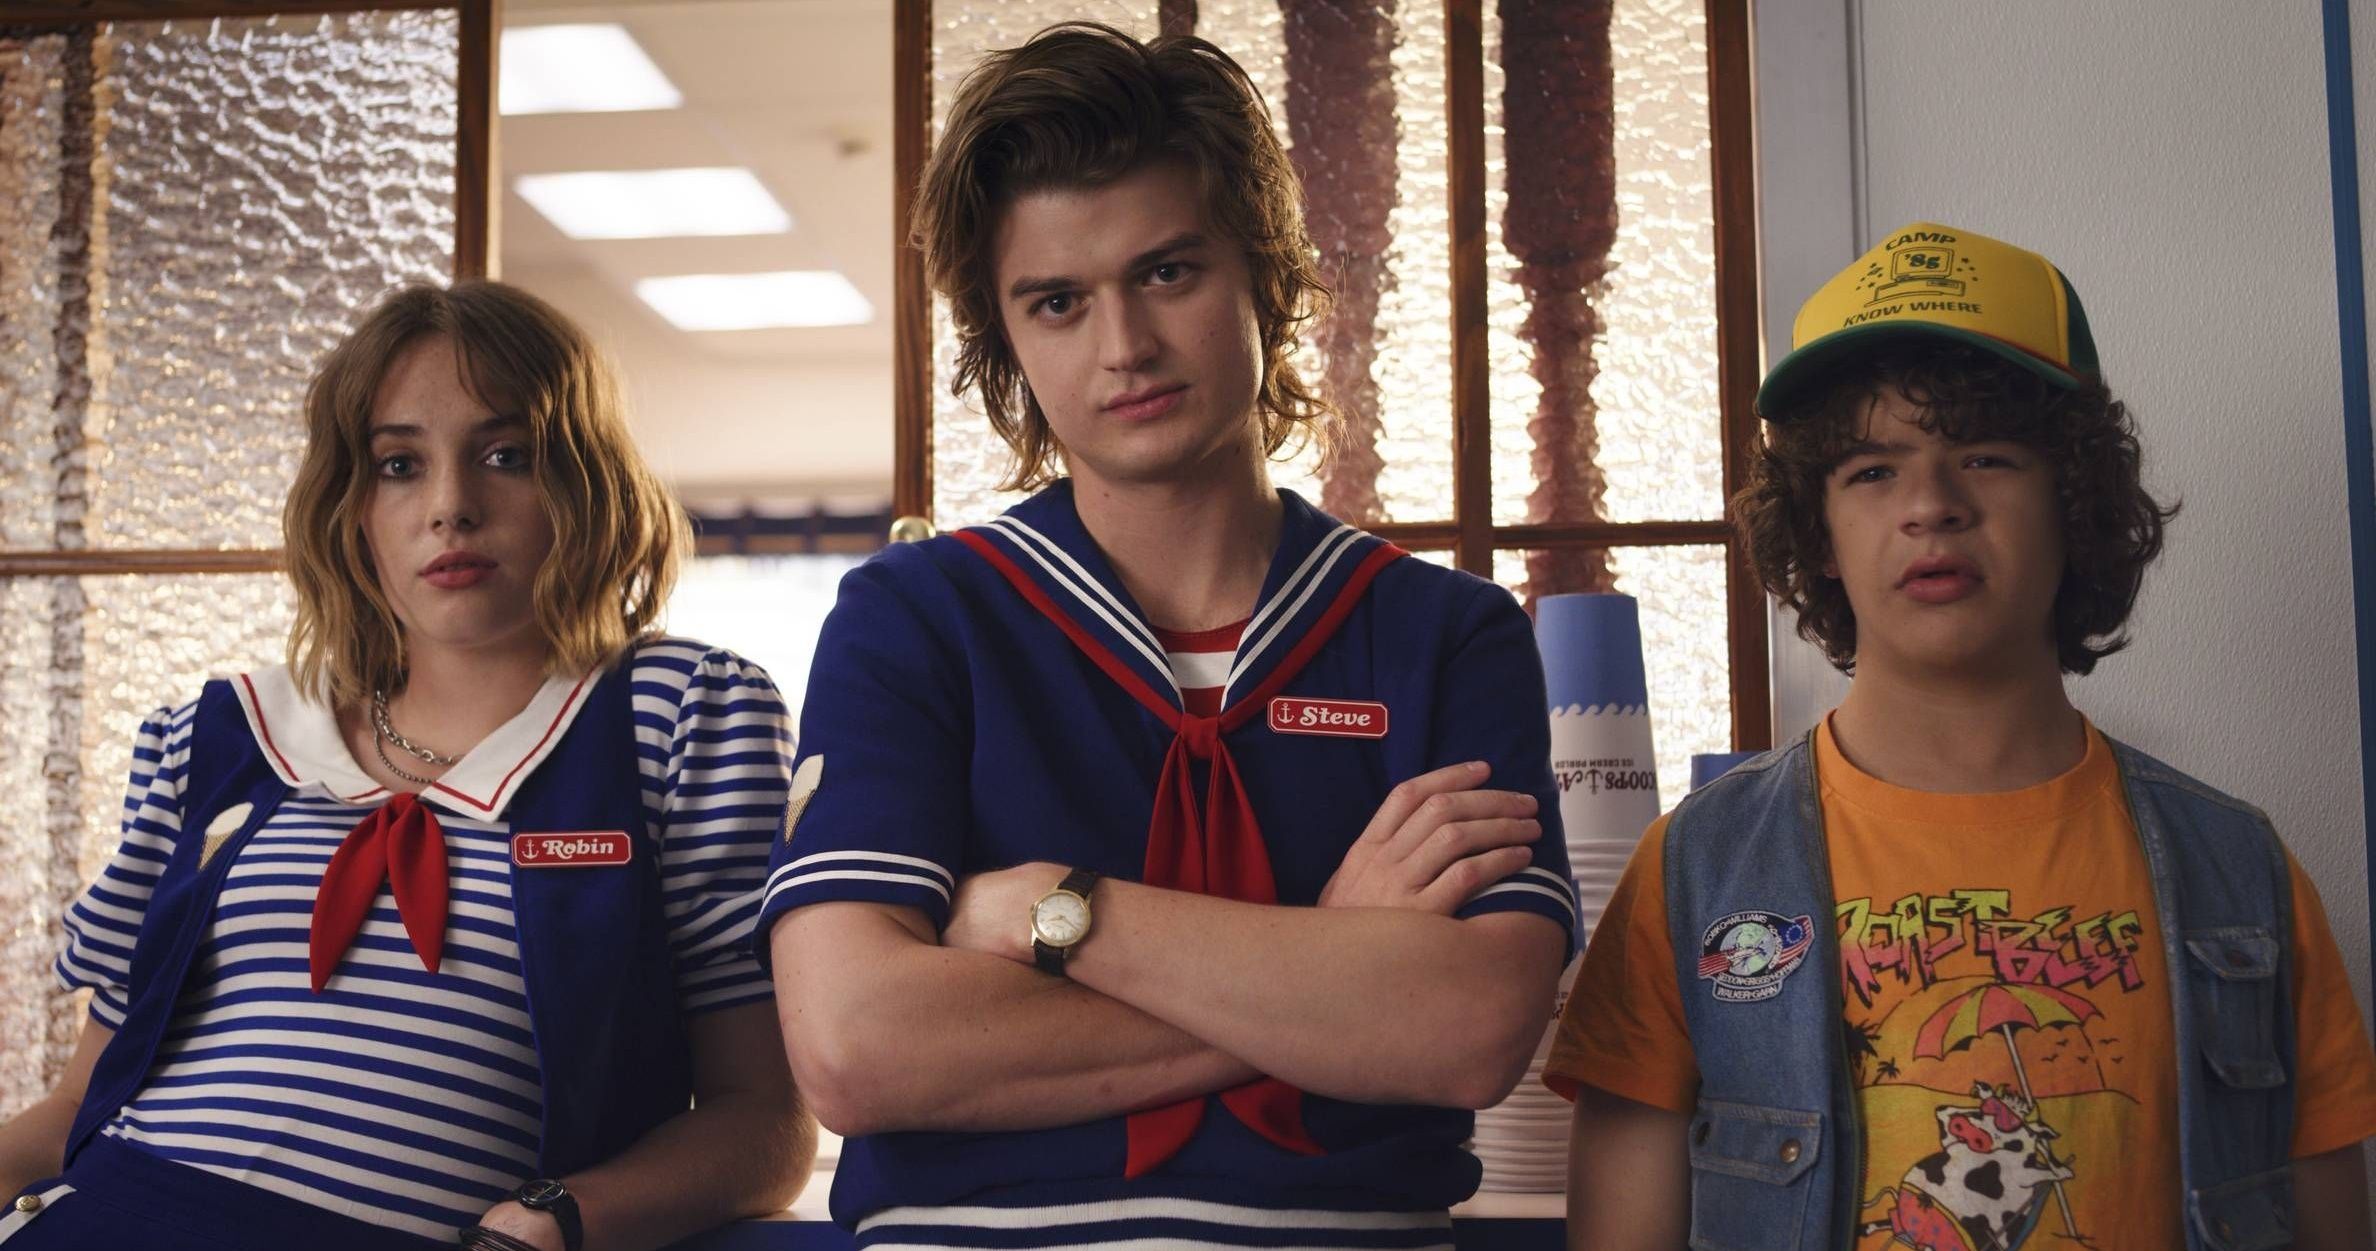 Robin, Steve, and Dustin at Scoops Ahoy in Stranger Things